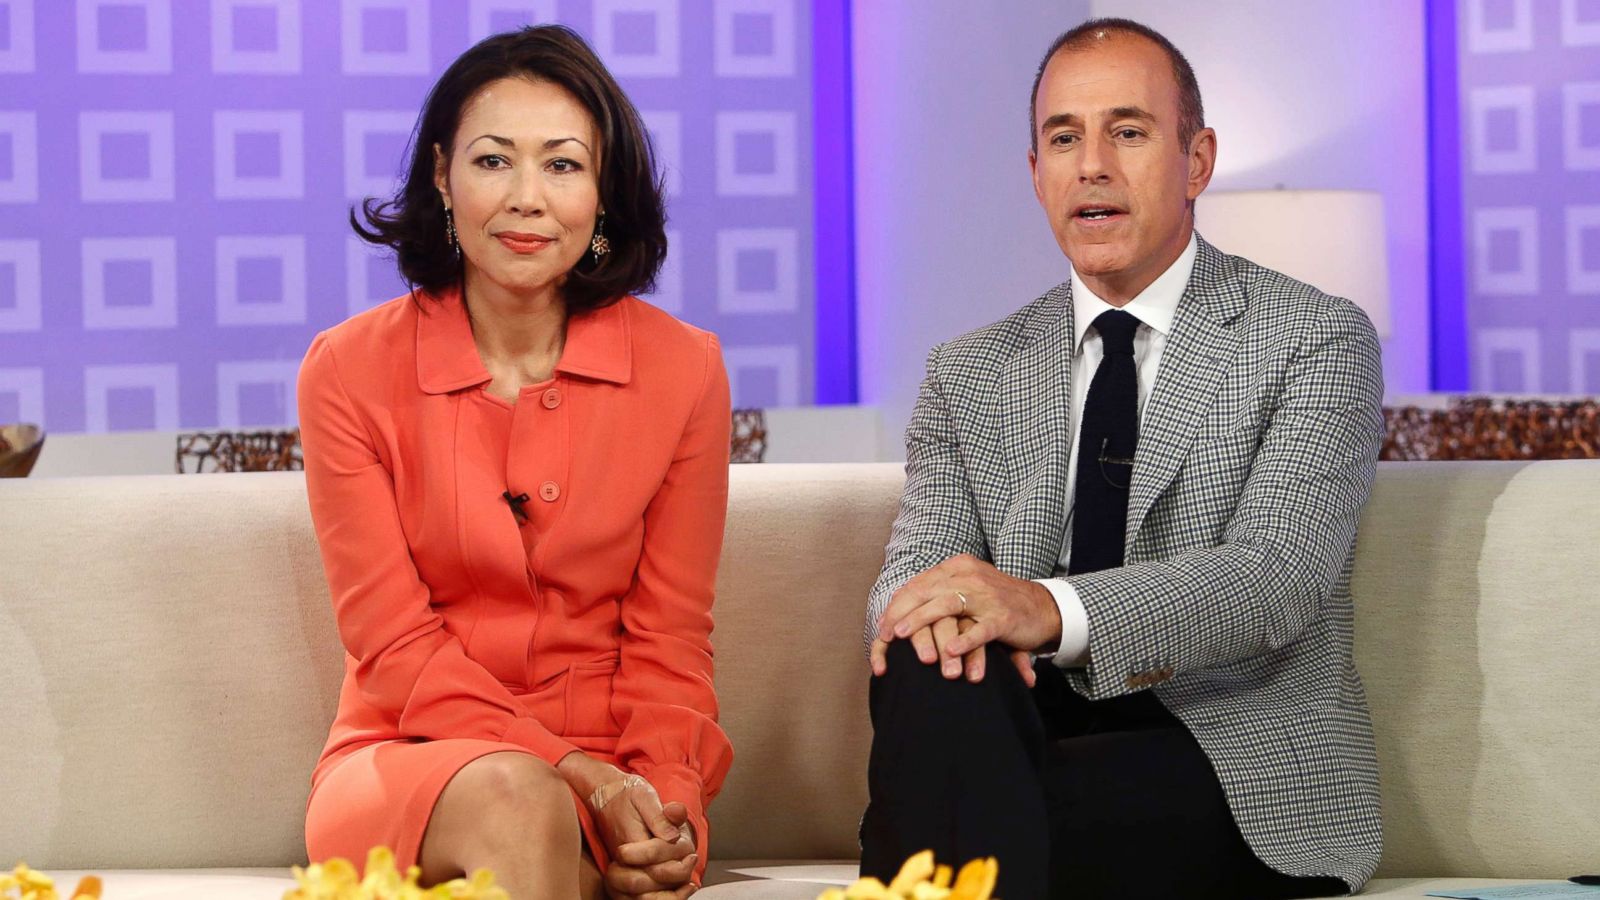 Ann Curry speaks out about Matt Lauer: 'I am not surprised by the  allegations' - ABC News